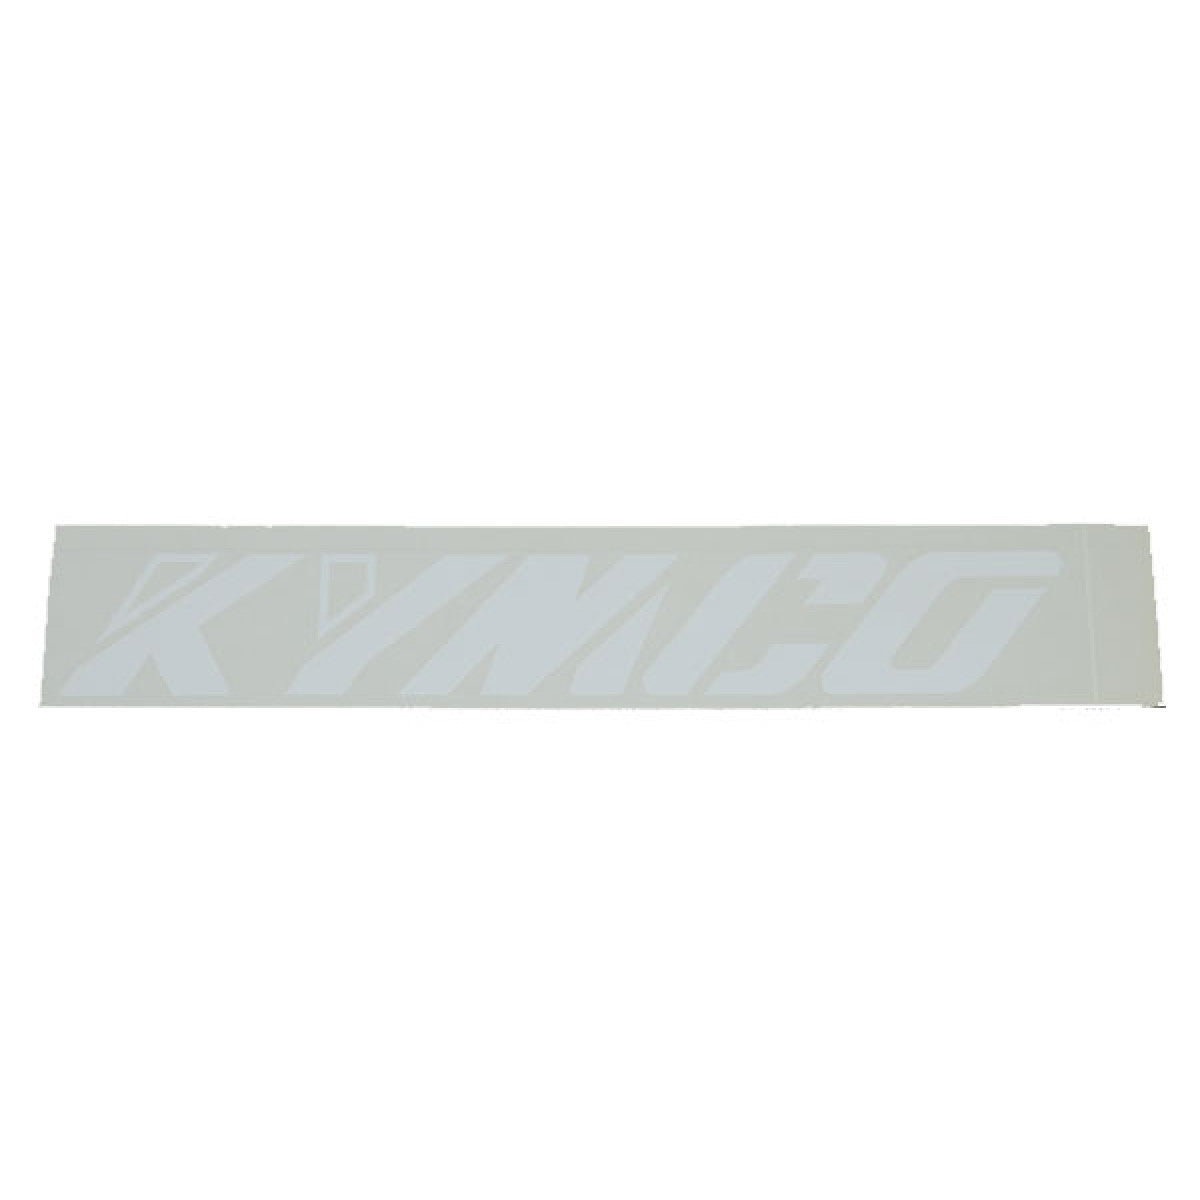 085020 : KYMCO WOORD WIT 190X30MM